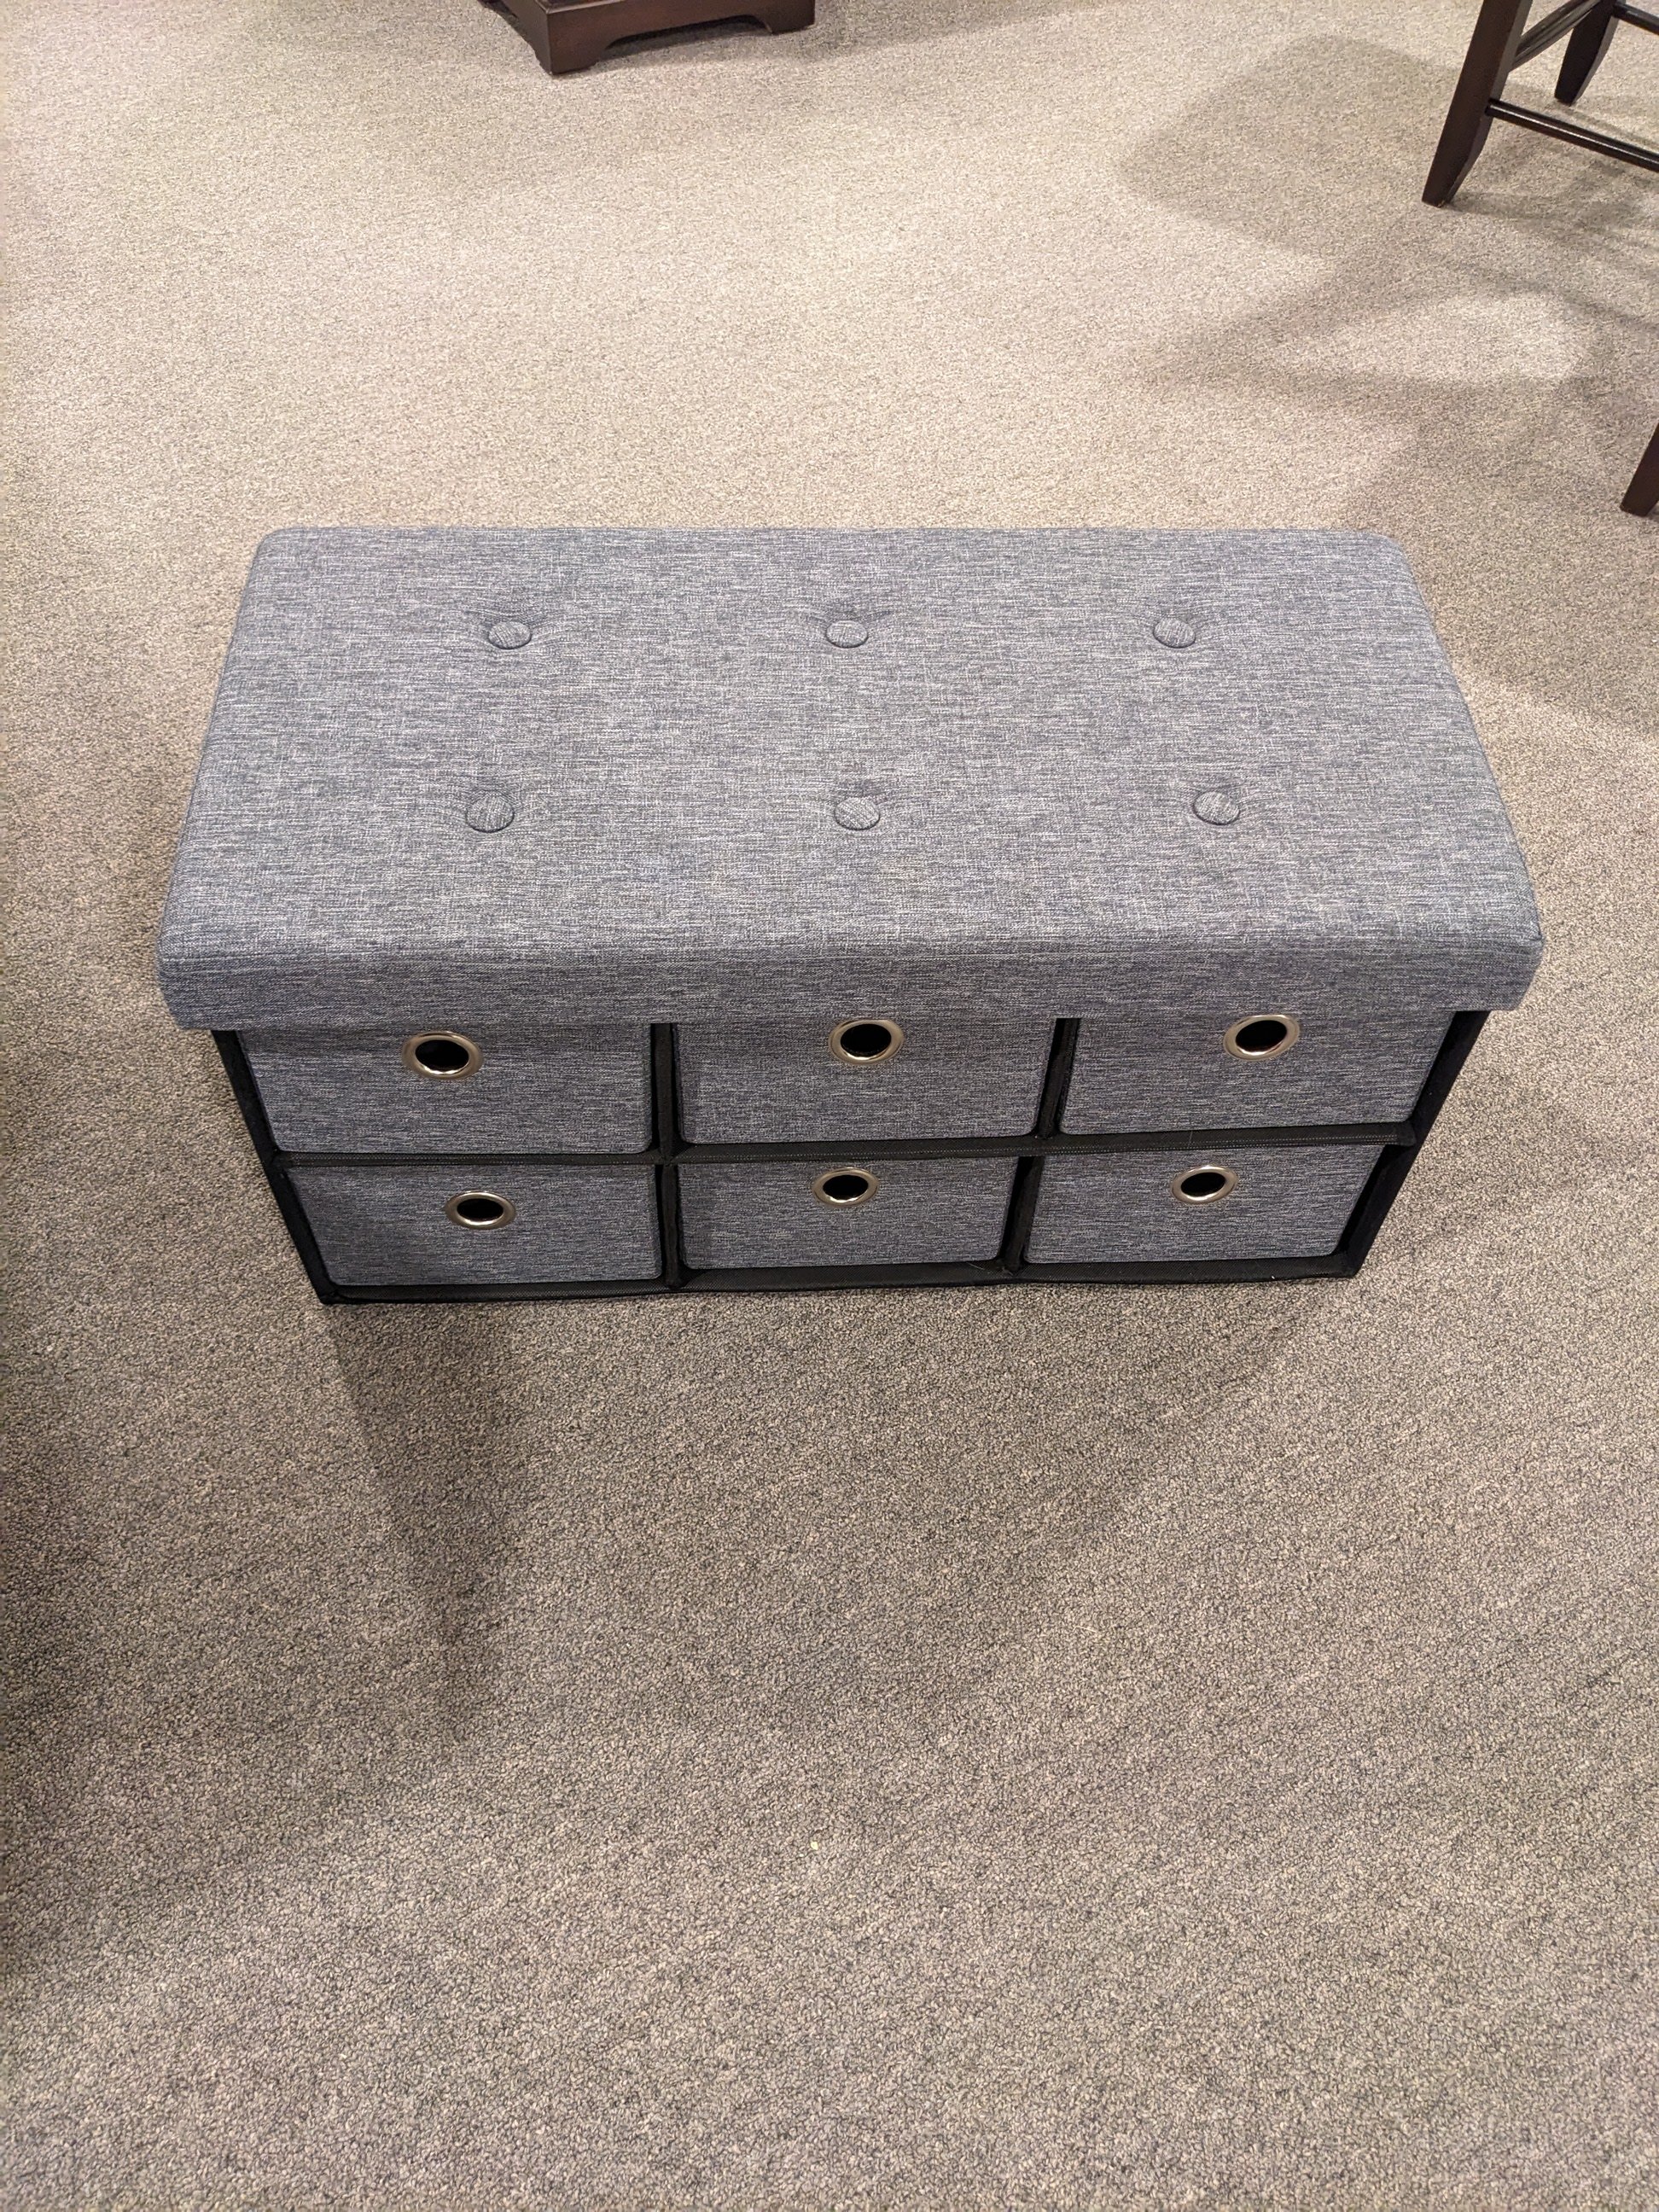 NEW Gray Storage Ottoman with Drawers